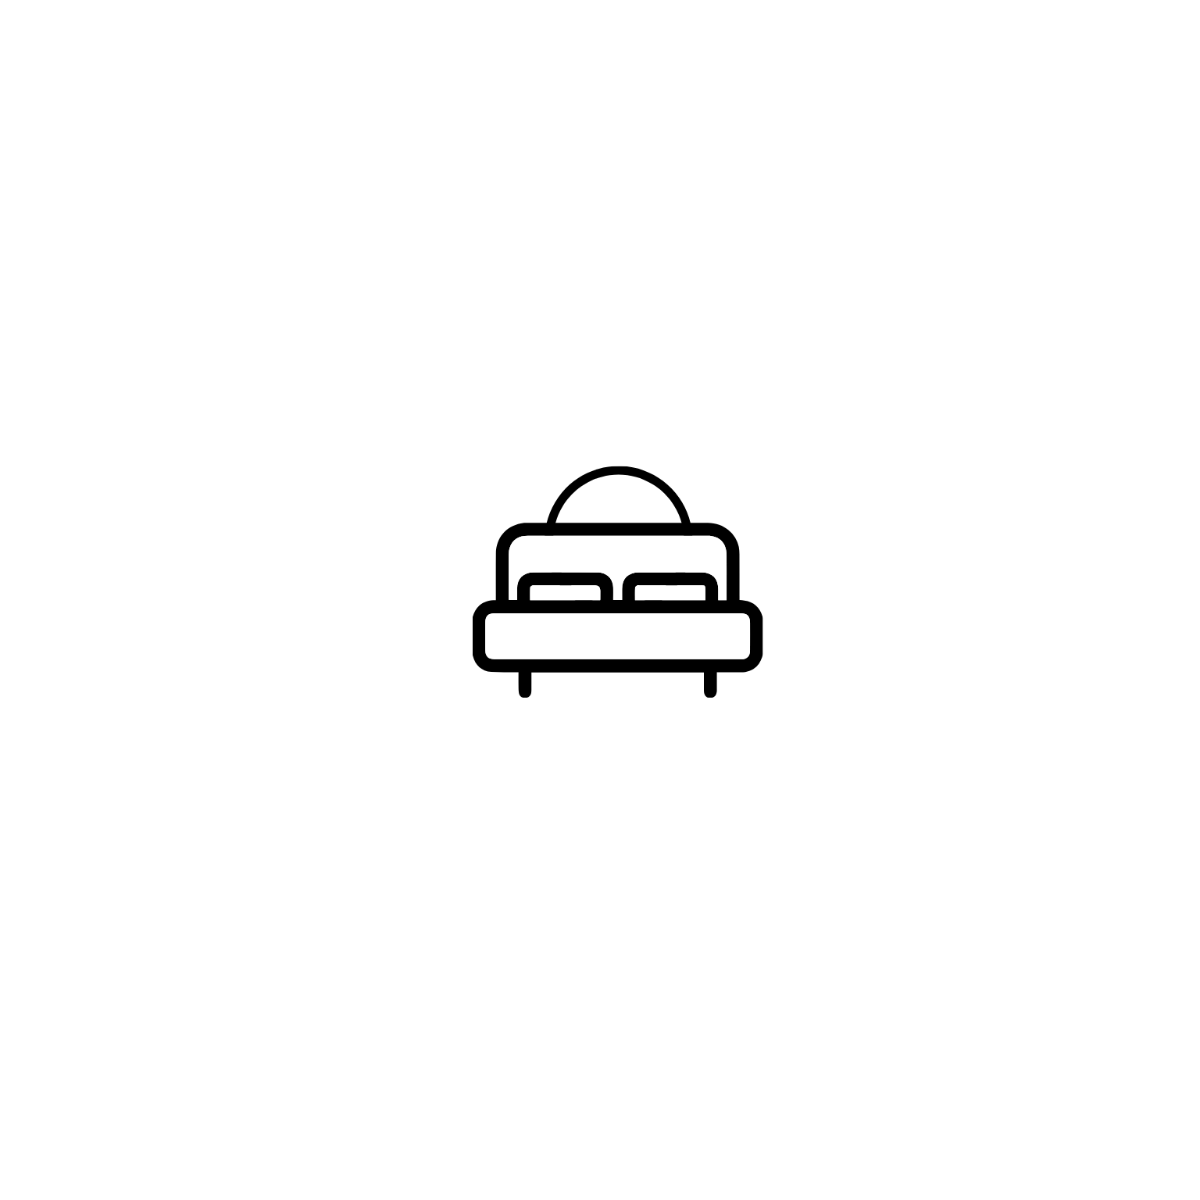 Hotel Bed Icon